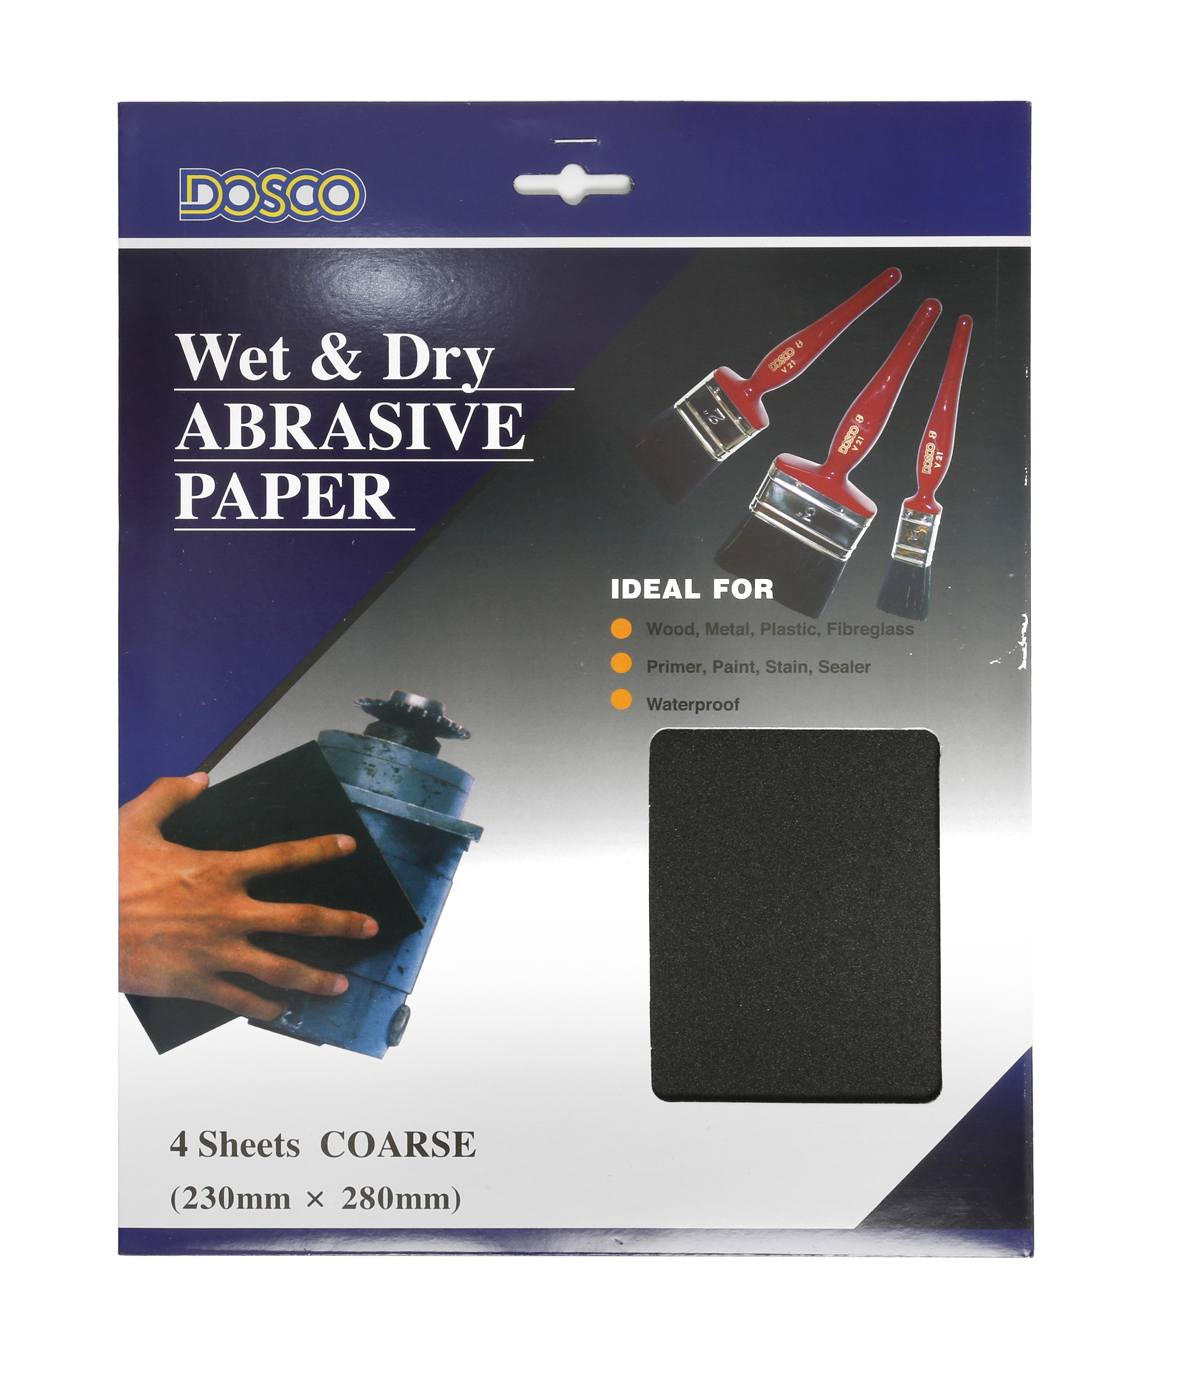 Dosco Wet And Dry Abrasive Paper Coarse